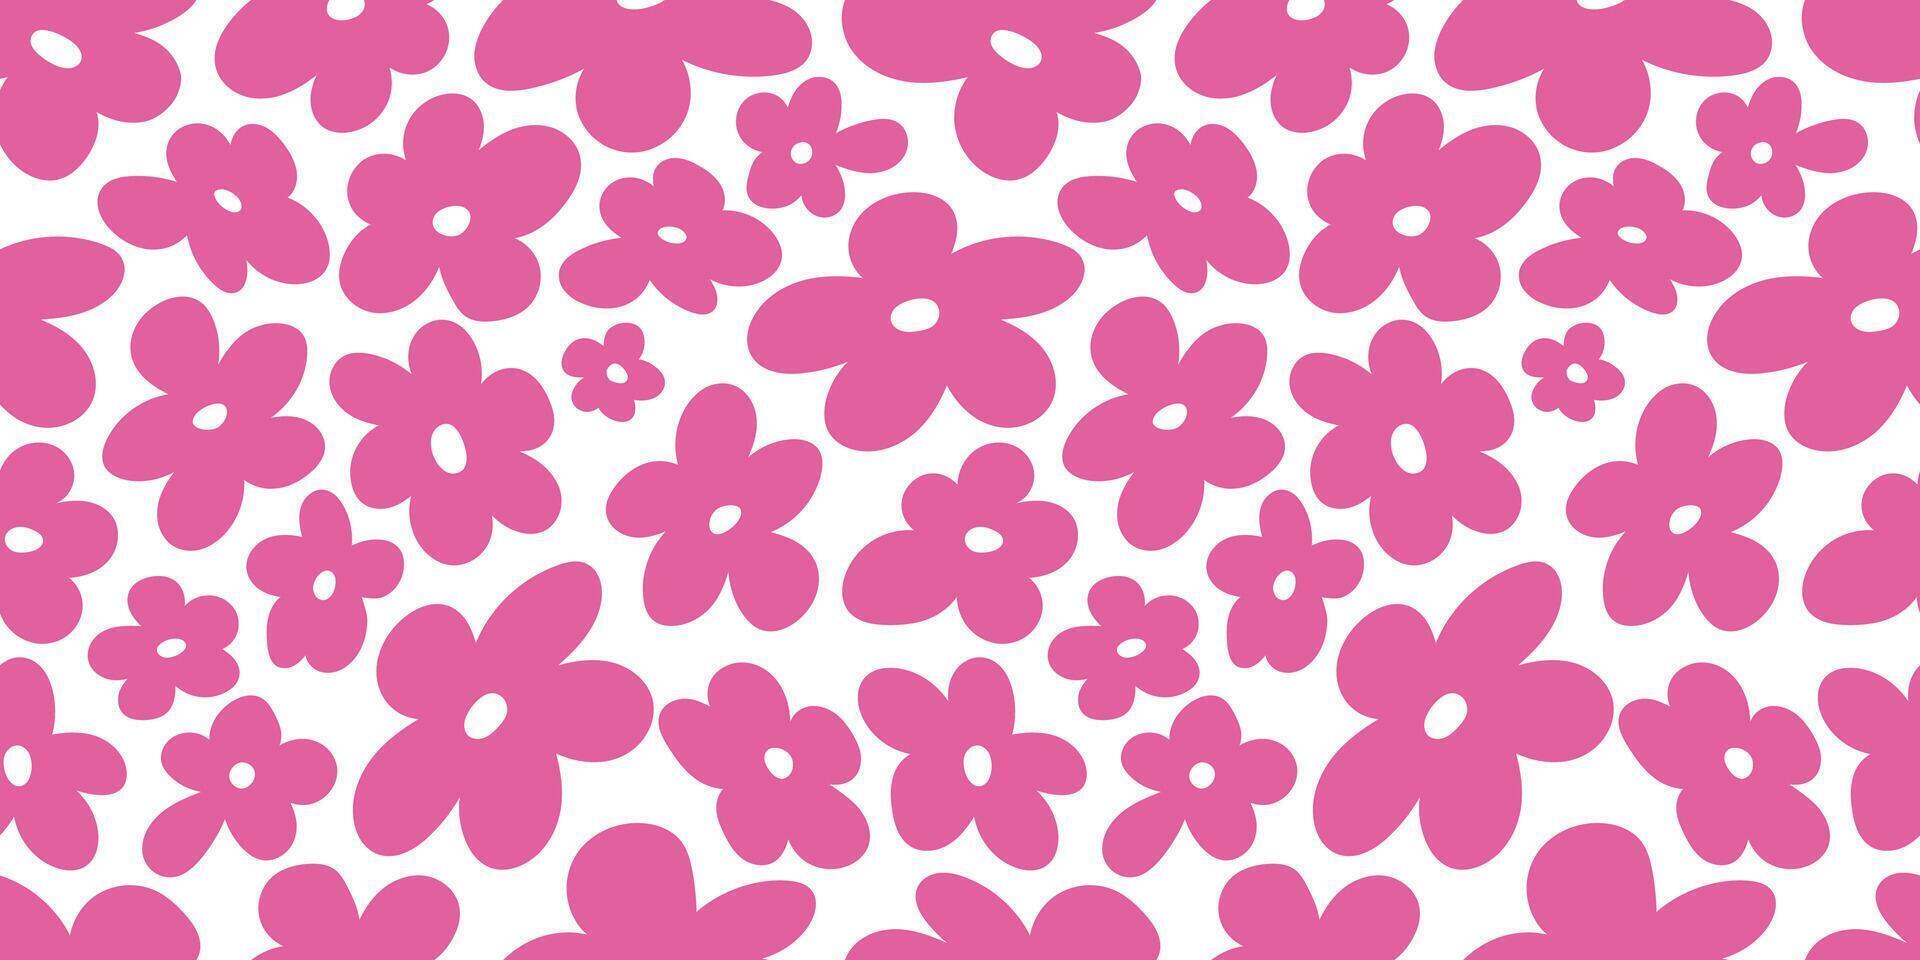 2000s flowers, y2k background. Seamless pattern with abstract pink flowers on white background vector